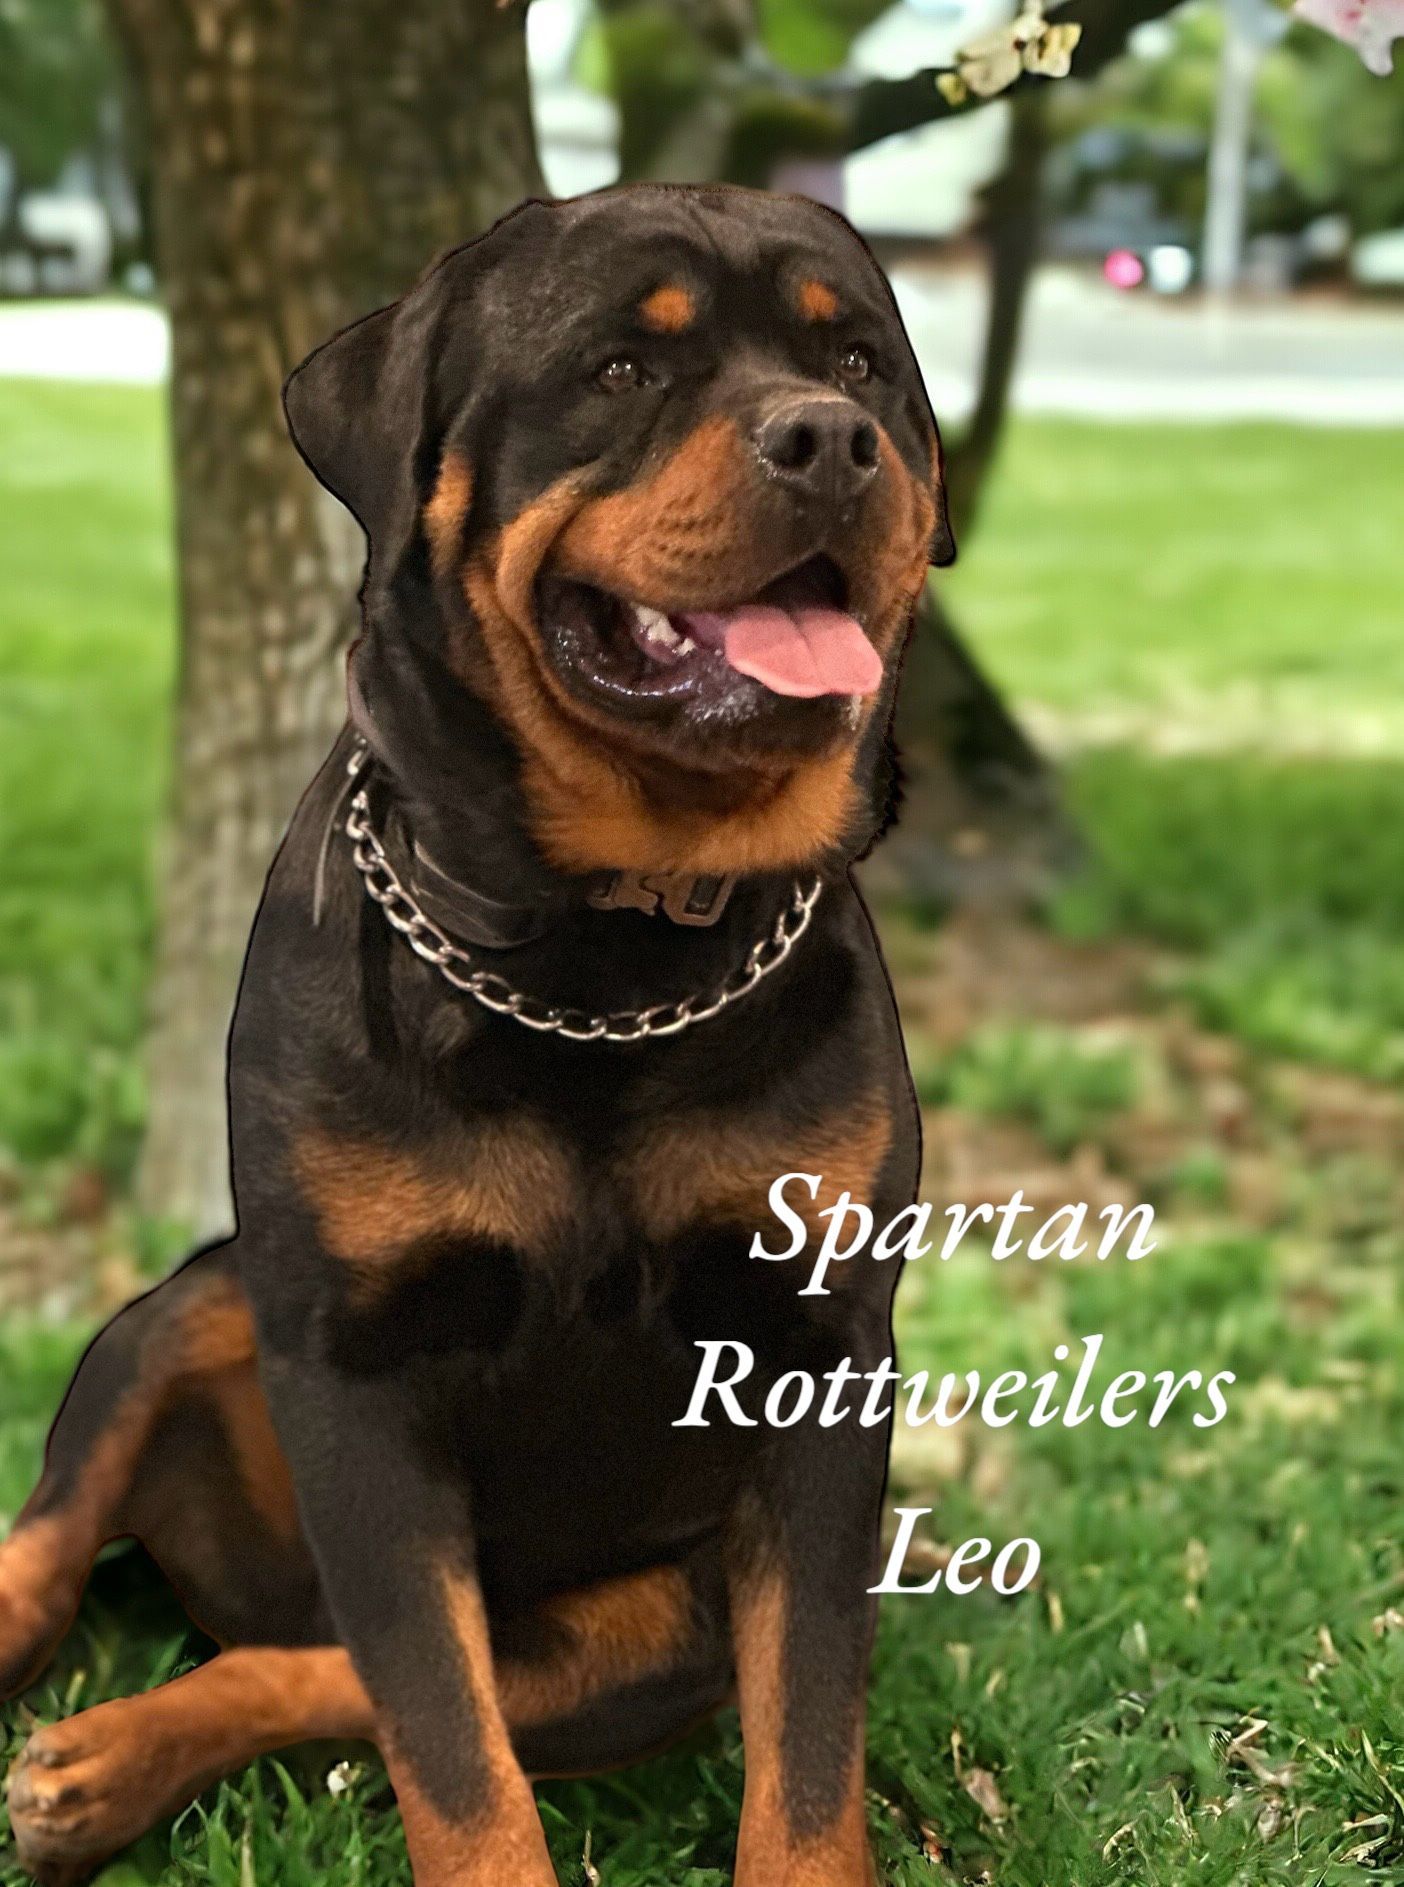 Spartan Rottweilers puppies for sale. Current litters of German Rottweiler puppies and future litters.